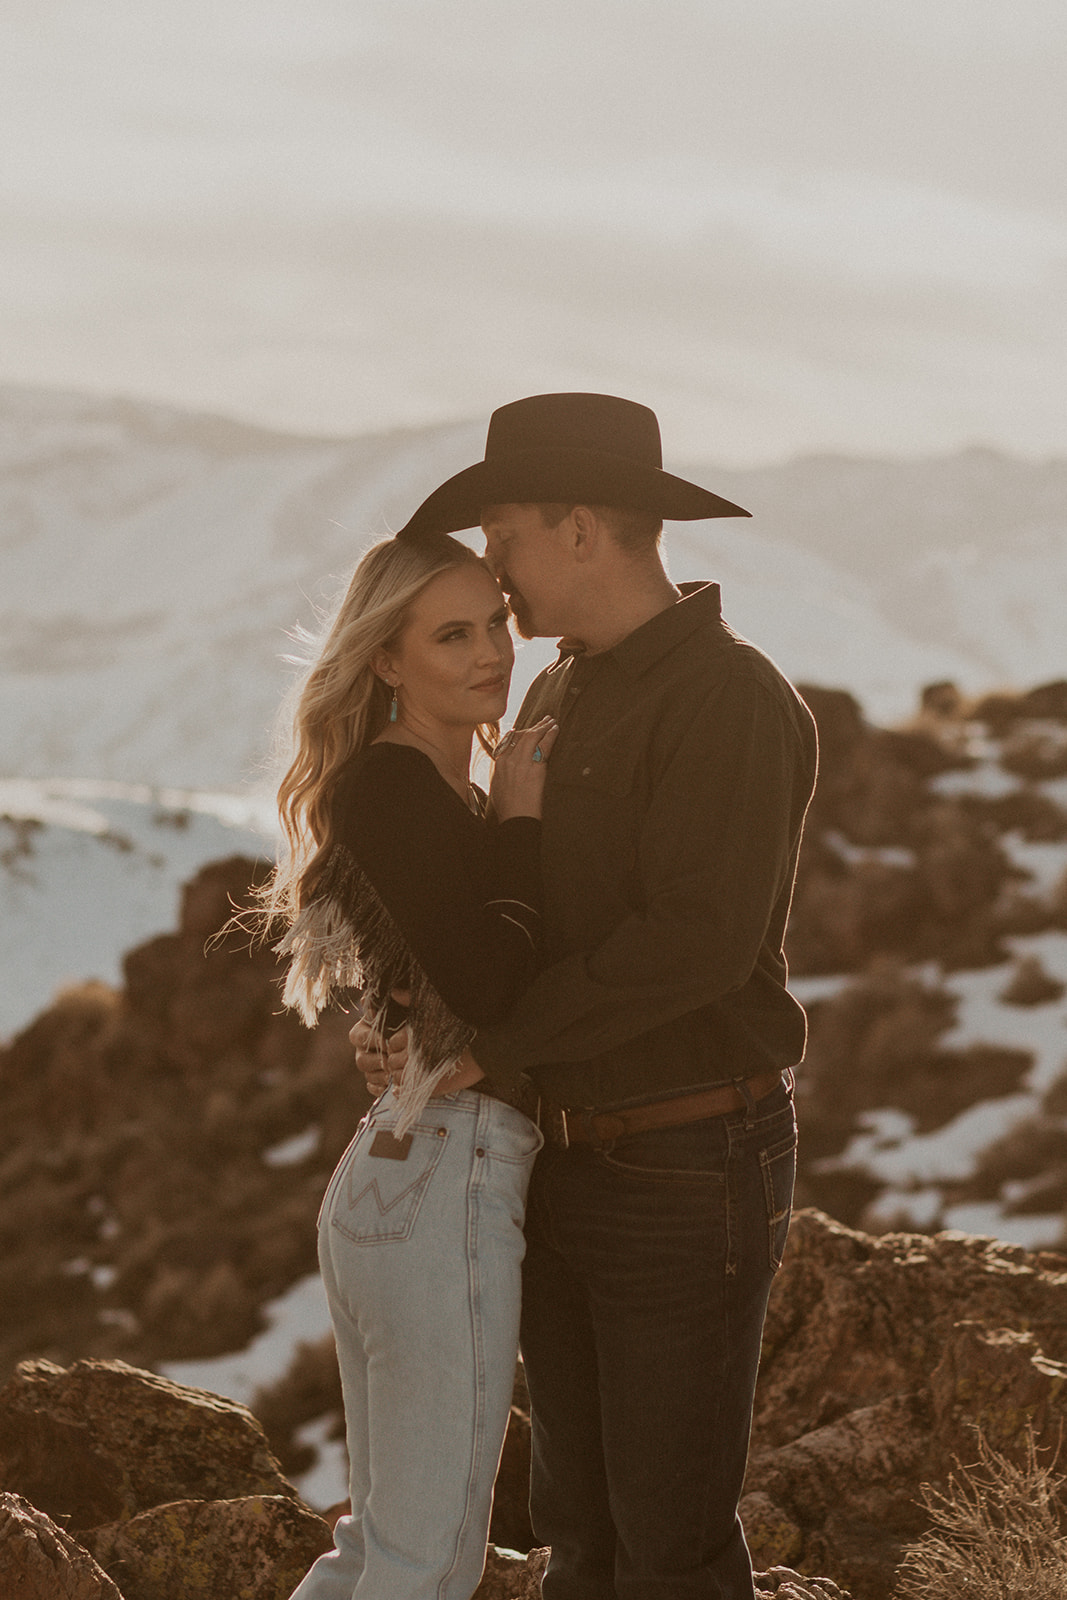 A couple above carson valley hugging and celebrating their engagement